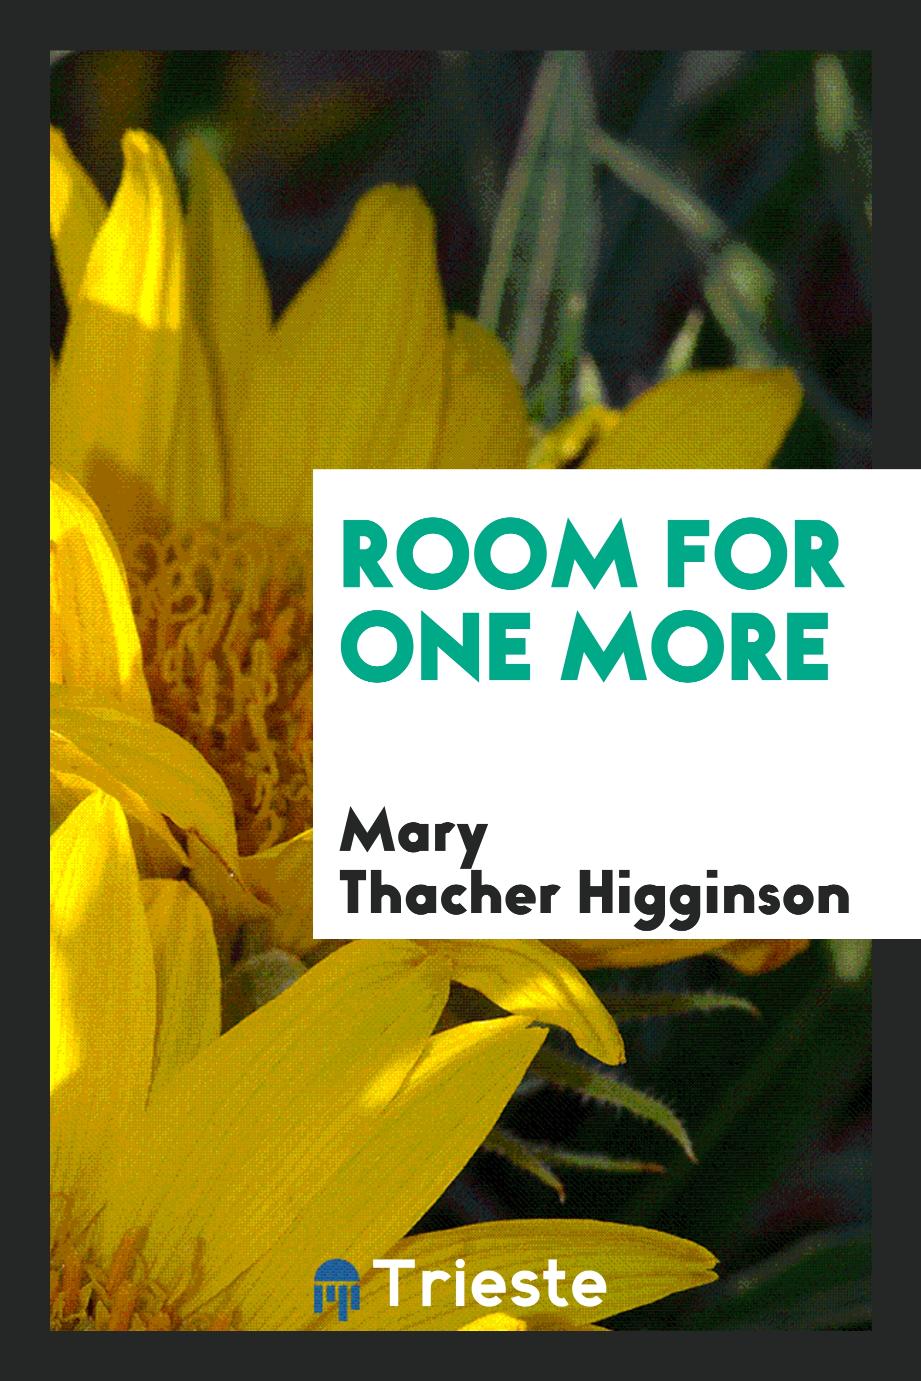 Mary Thacher Higginson - Room for one more